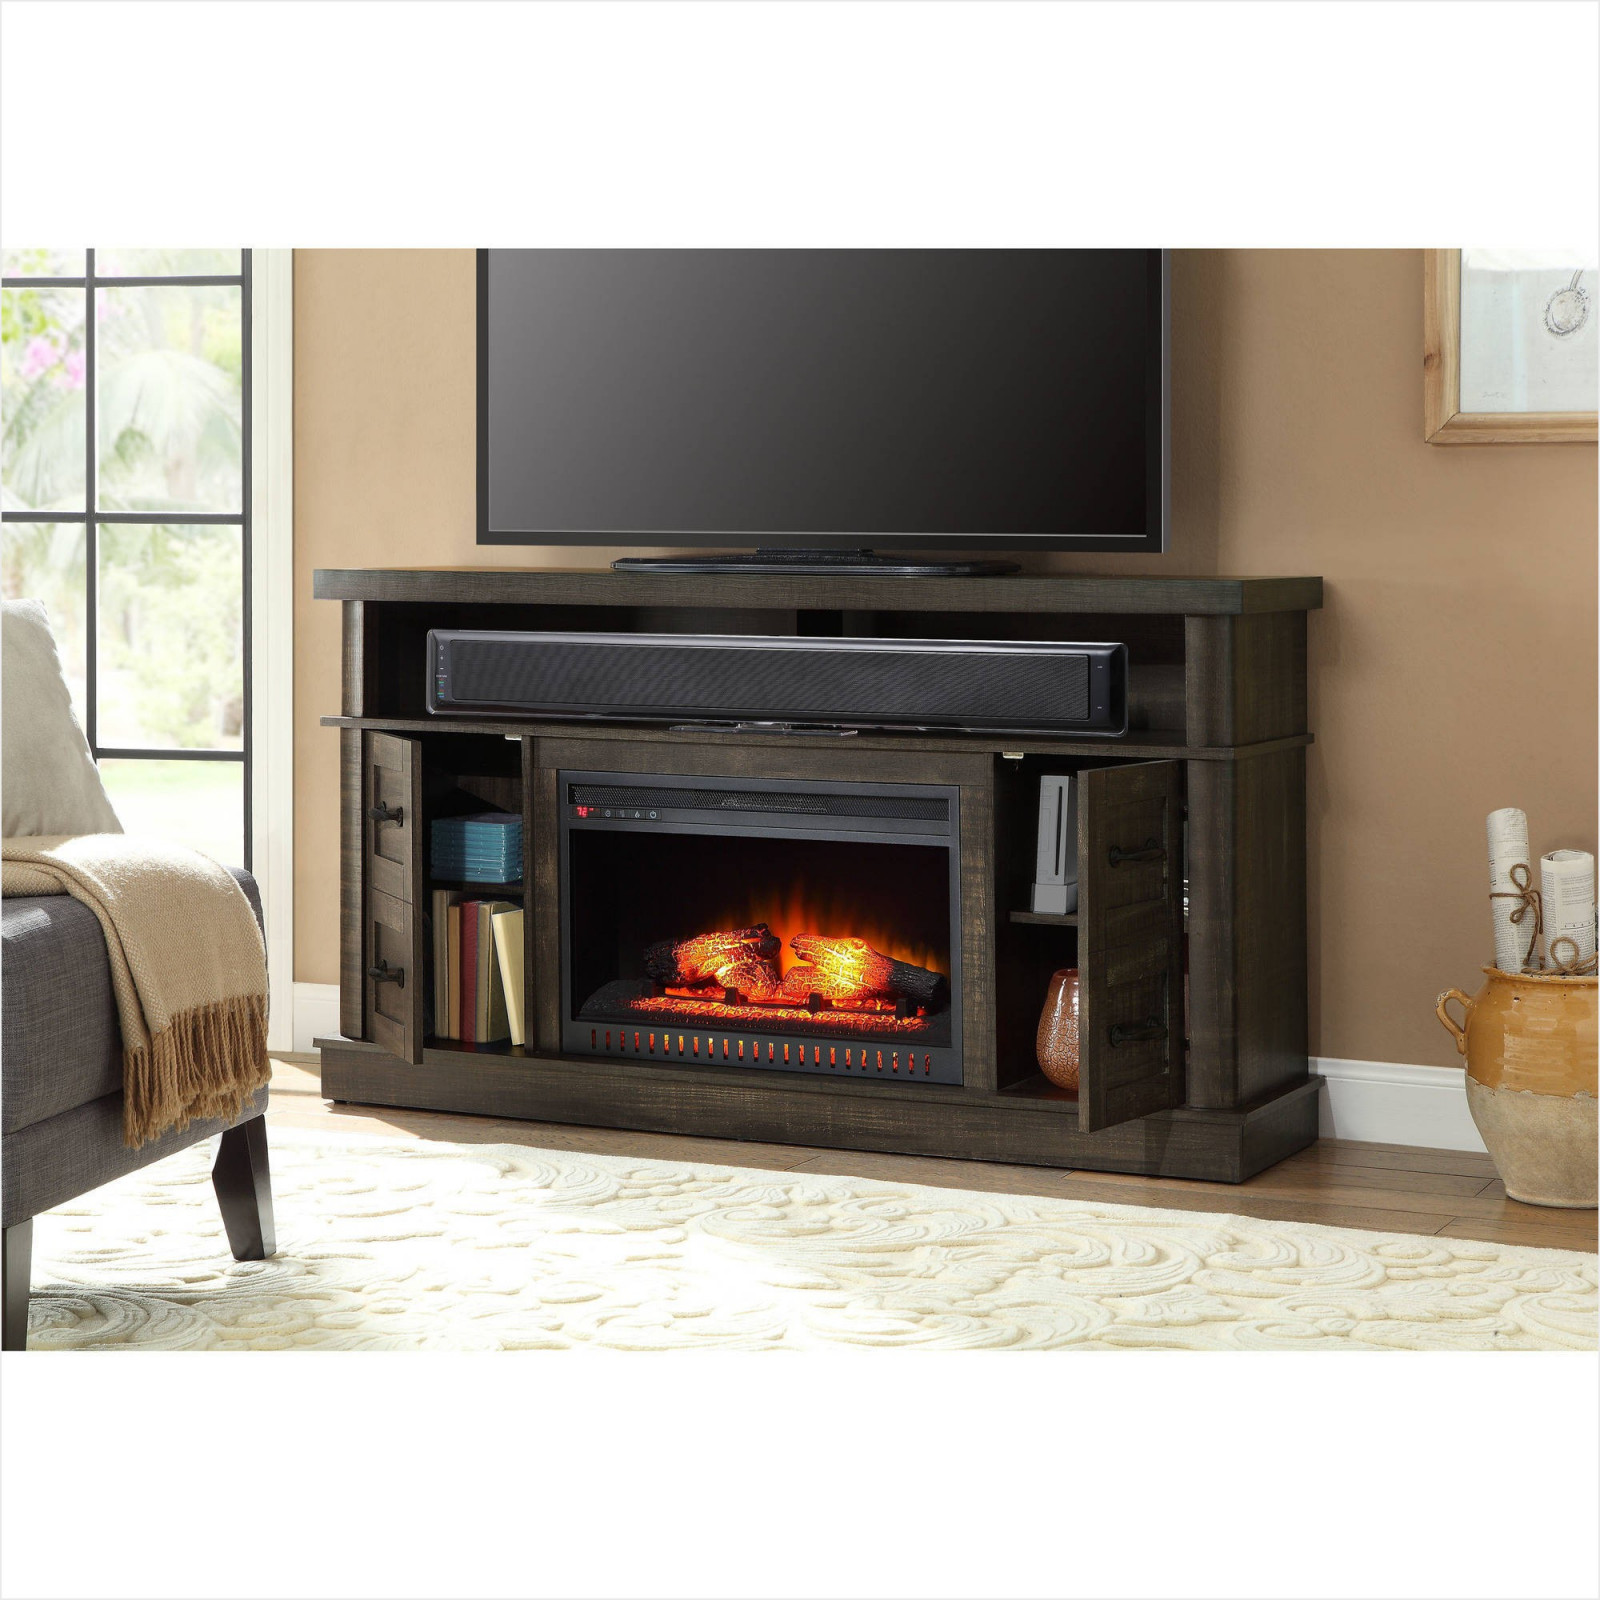 Where to Buy Gas Fireplace Elegant 35 Minimaliste Electric Fireplace Tv Stand